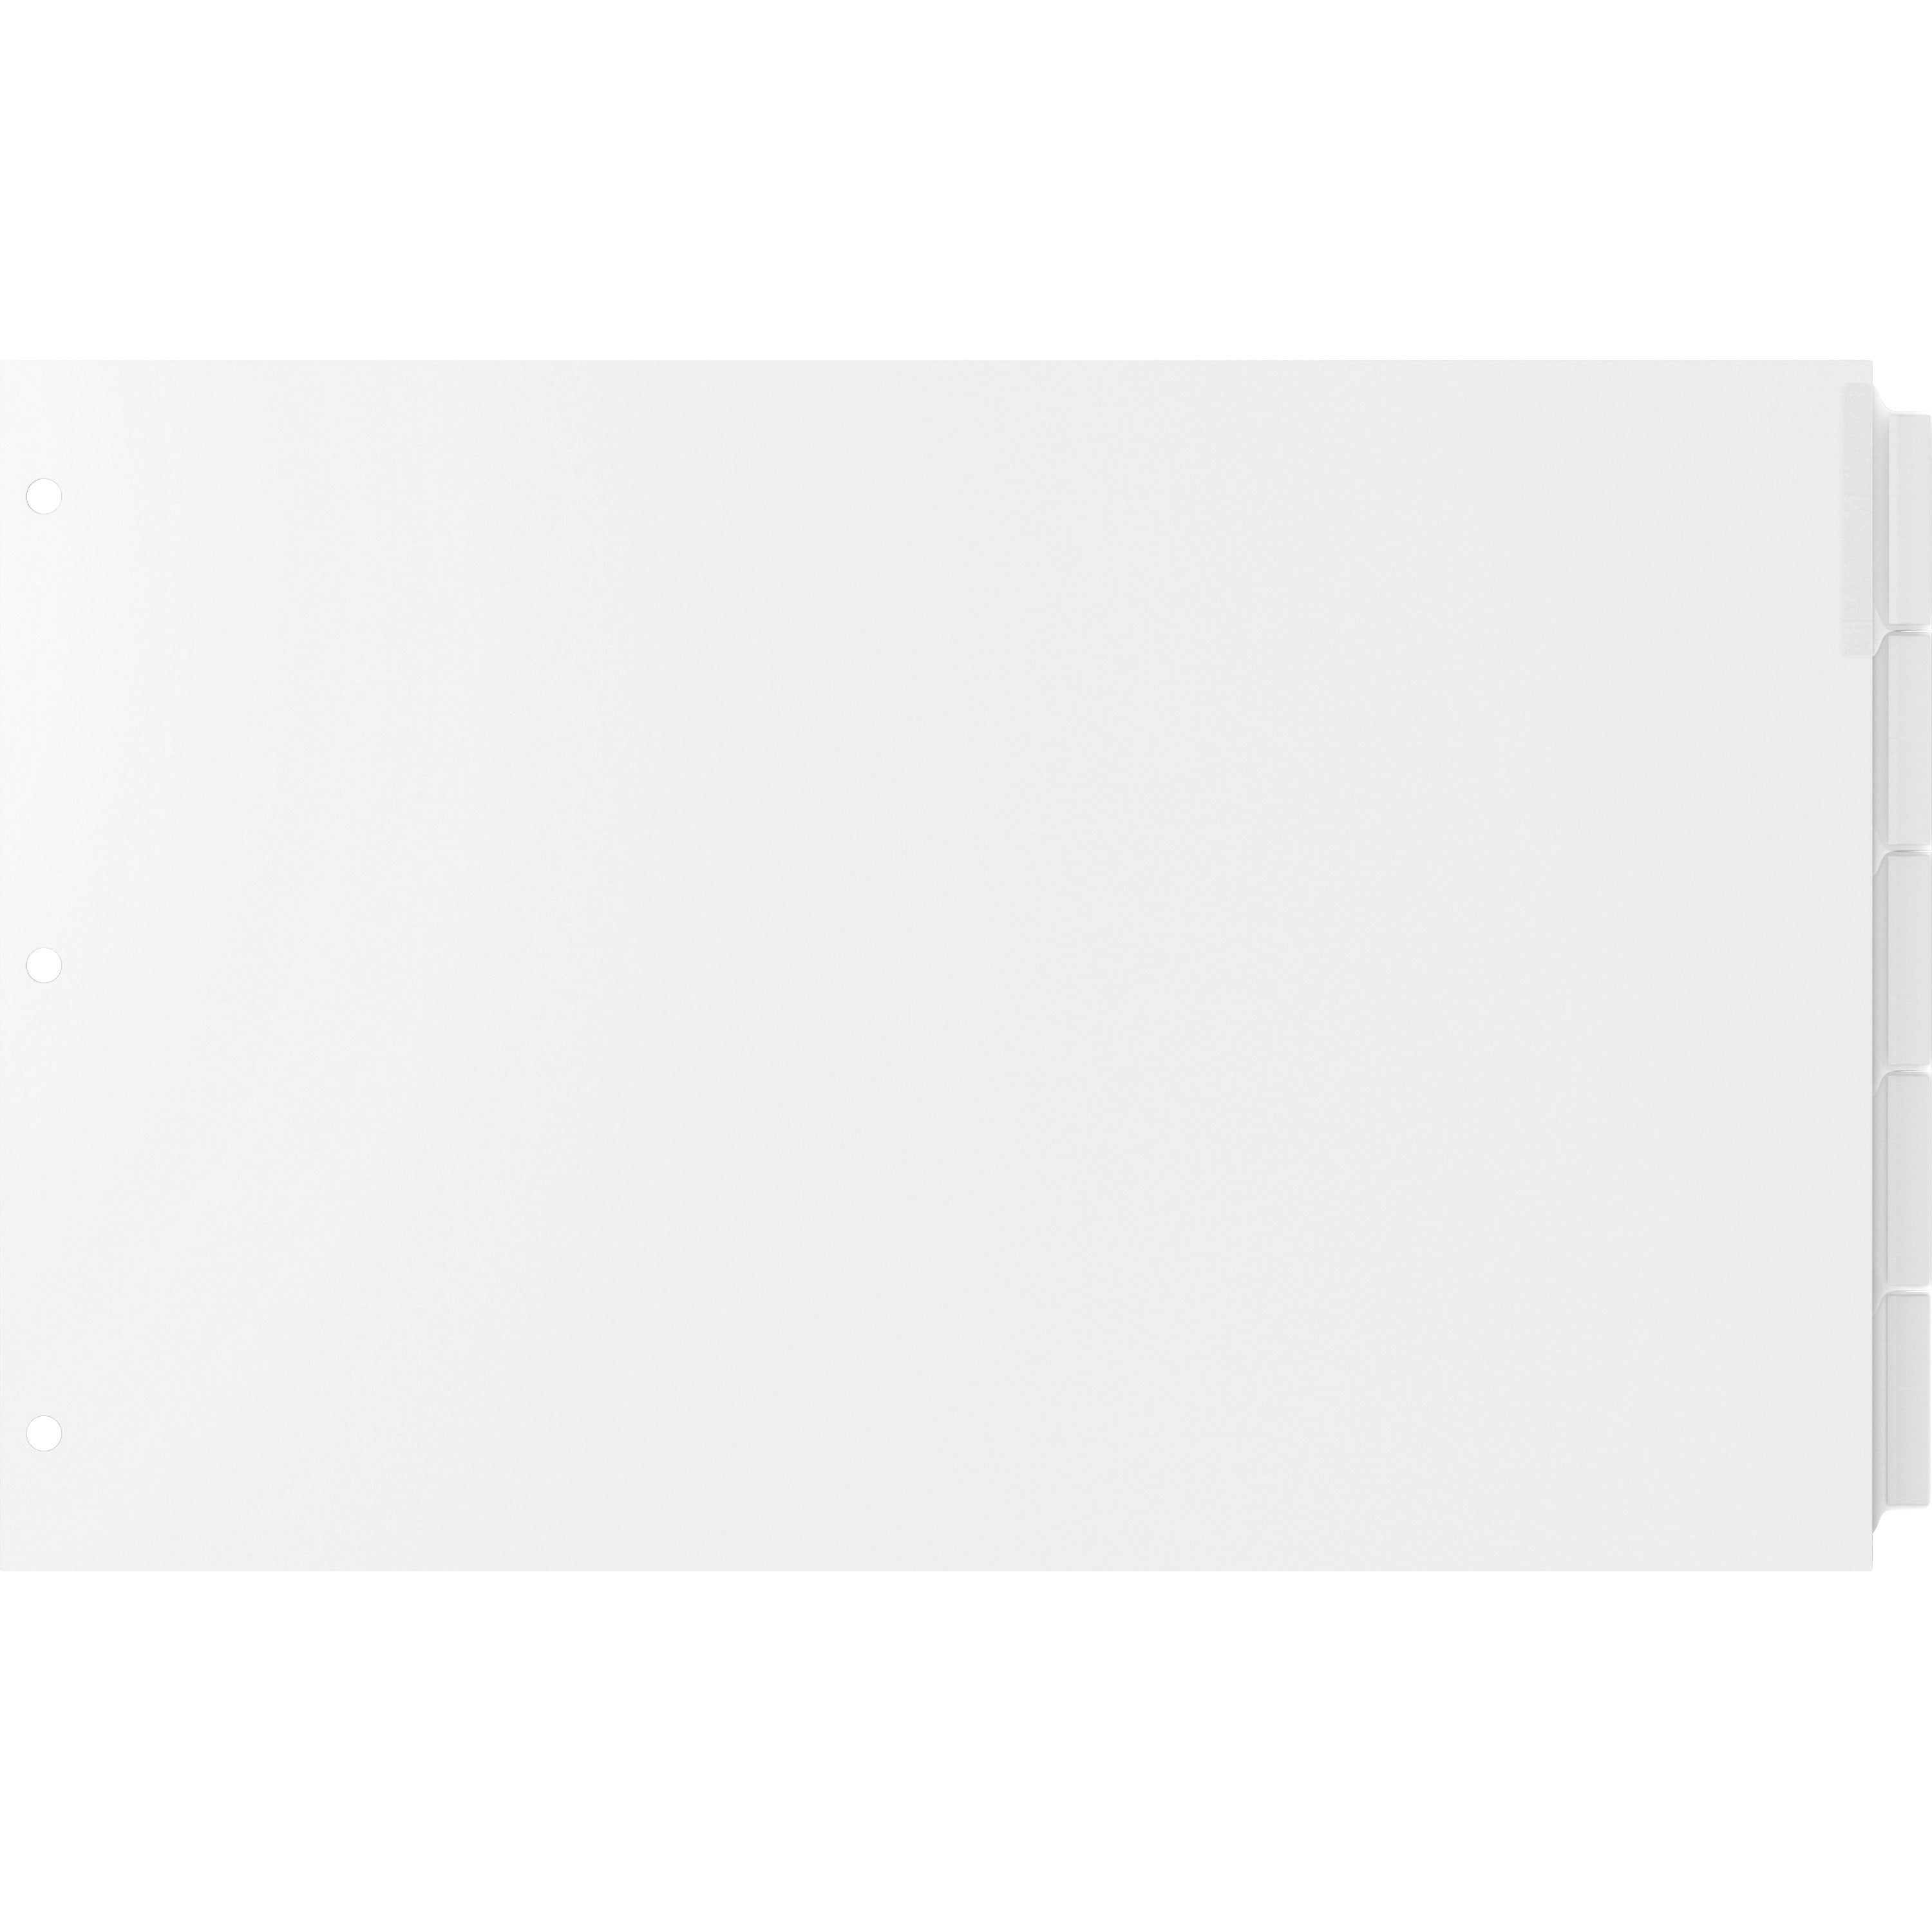 EasyFit Insertable 5-Tab Index Dividers - 5 x Divider(s) - 5 Tab(s)/Set - 11" Divider Width x 17" Divider Length - Ledger - 3 Hole Punched - White Divider - Clear Tab(s) - Recycled - Reinforced Edges, Punched - 5 / Set - 